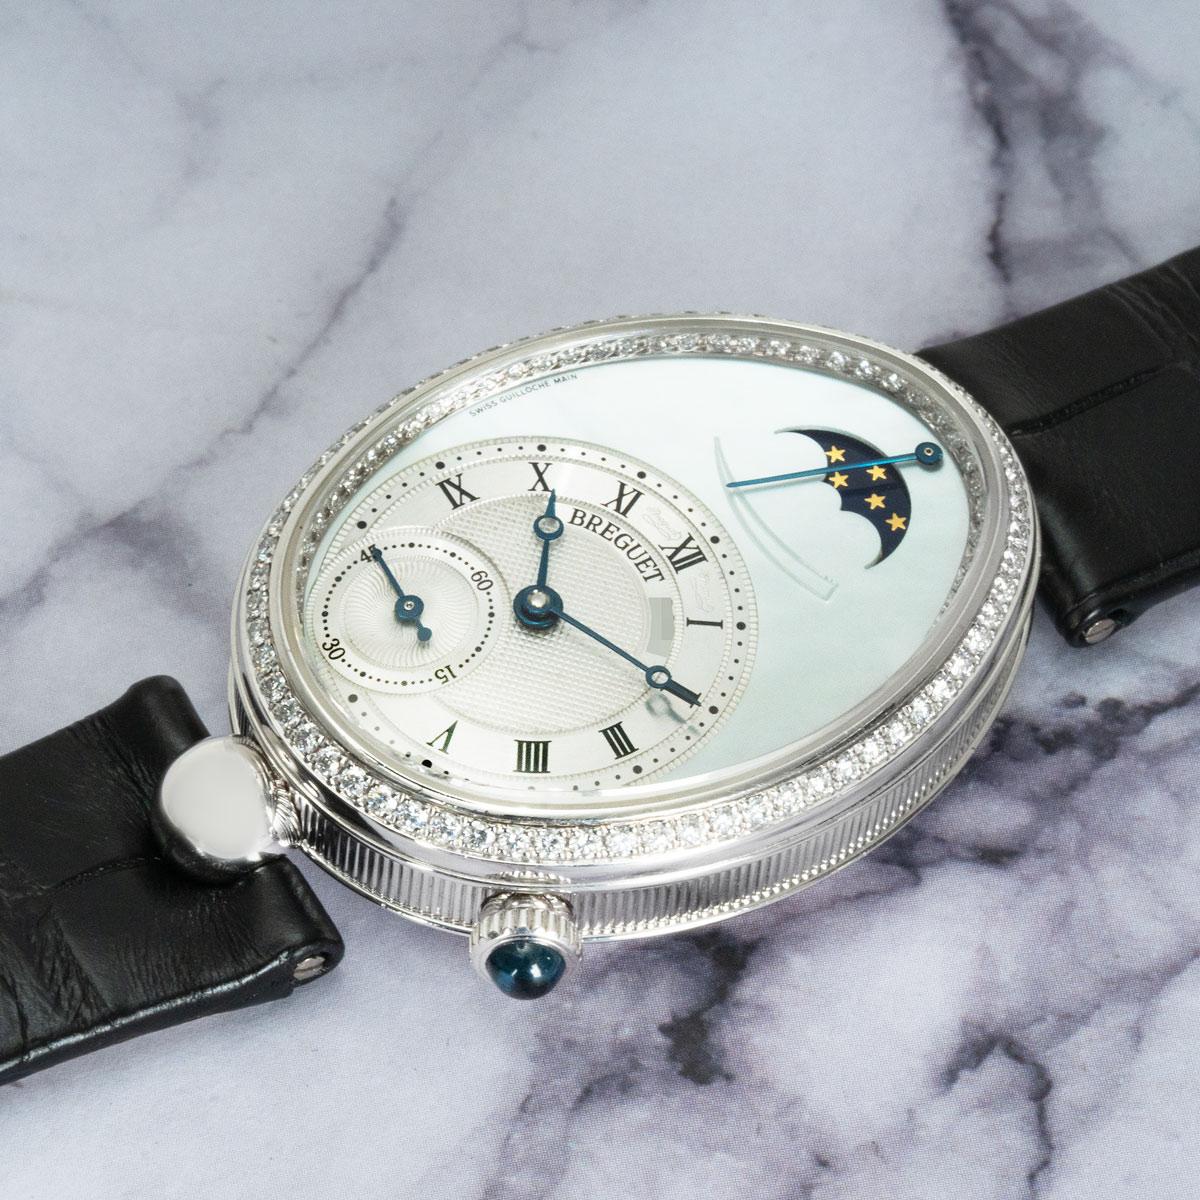 A white gold Reine de Naples from Breguet. Features a mother of pearl dial with a smaller silvered dial featuring a Breguet signature either side of XII. The dials feature blued steel Breguet hands, a small seconds display and a power reserve and